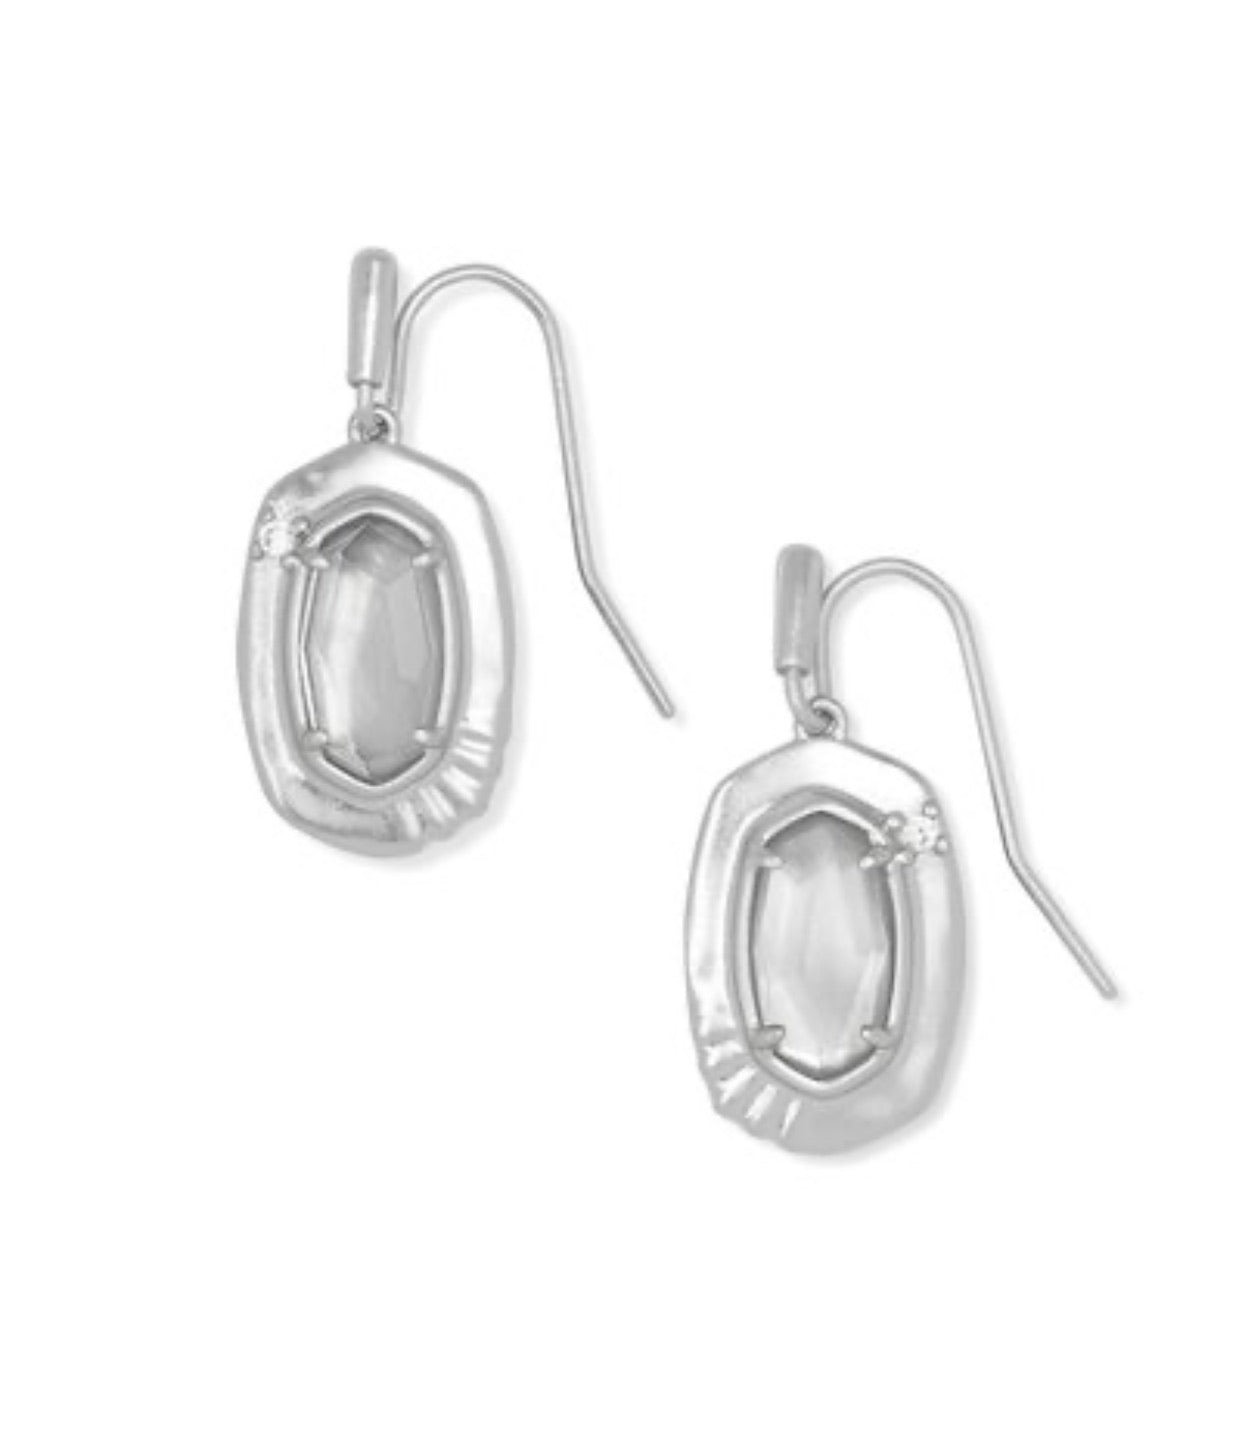 Kendra Scott Small Anna Drop Earring - Available in 4 Colors